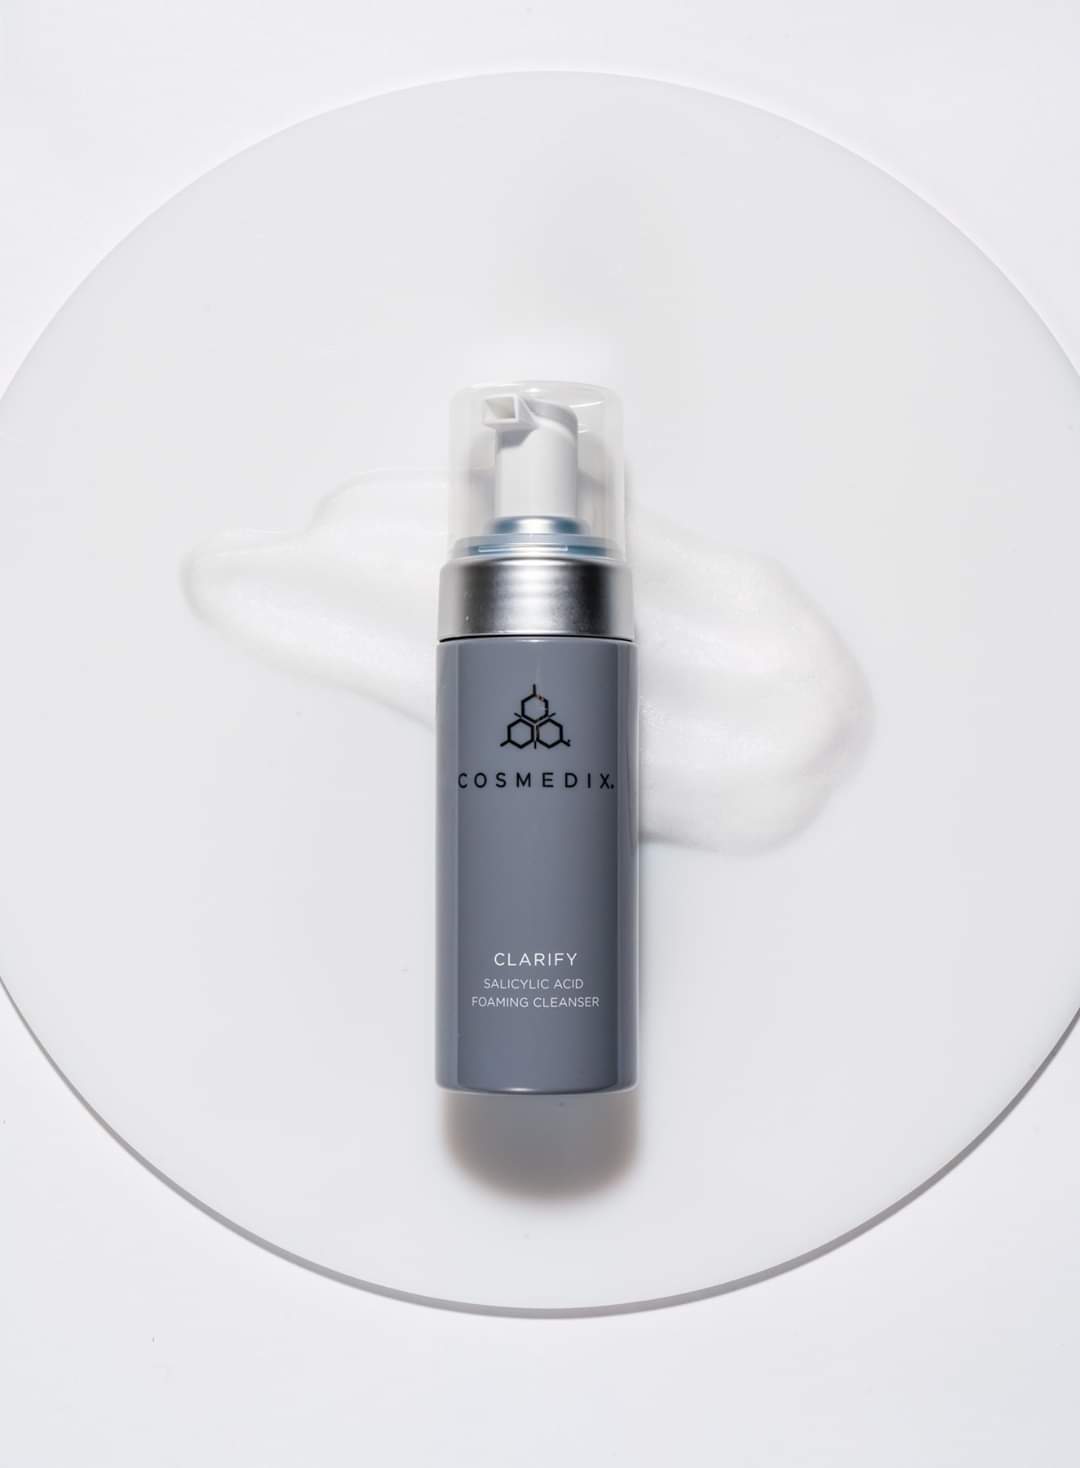 Cosmedix CLARIFY Foaming Cleanser - Exquisite Laser Clinic